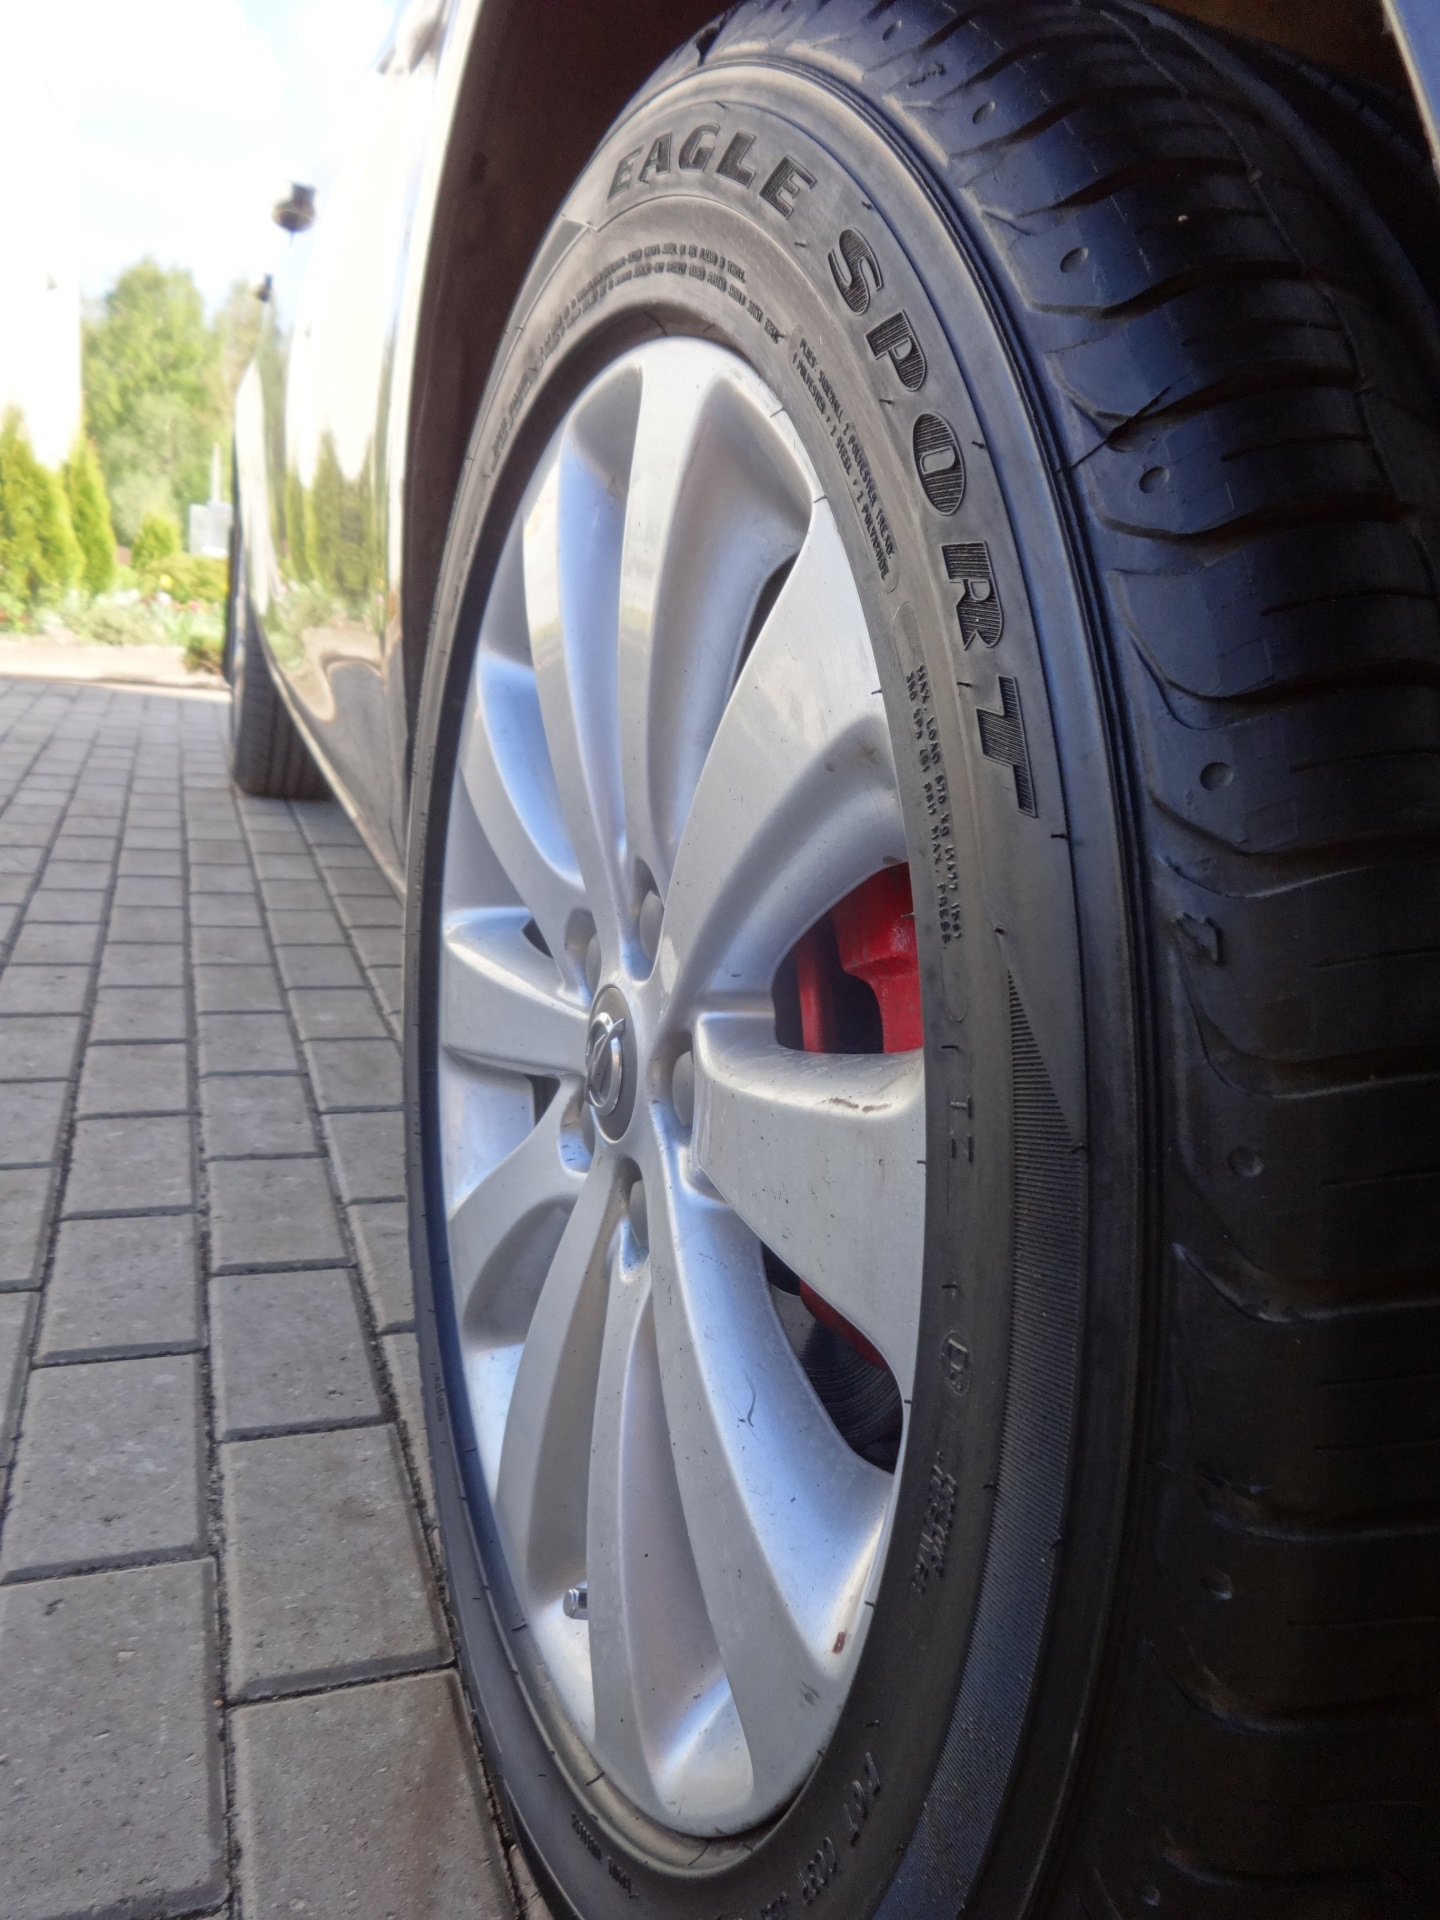 Goodyear eagle sport 215 55. Гудиер игл спорт TZ 215/55/17. Гудиер игл спорт 2 215/55 r17. Goodyear Eagle Sport TZ. 215 60 16 Гудиер игл спорт ТЗ.